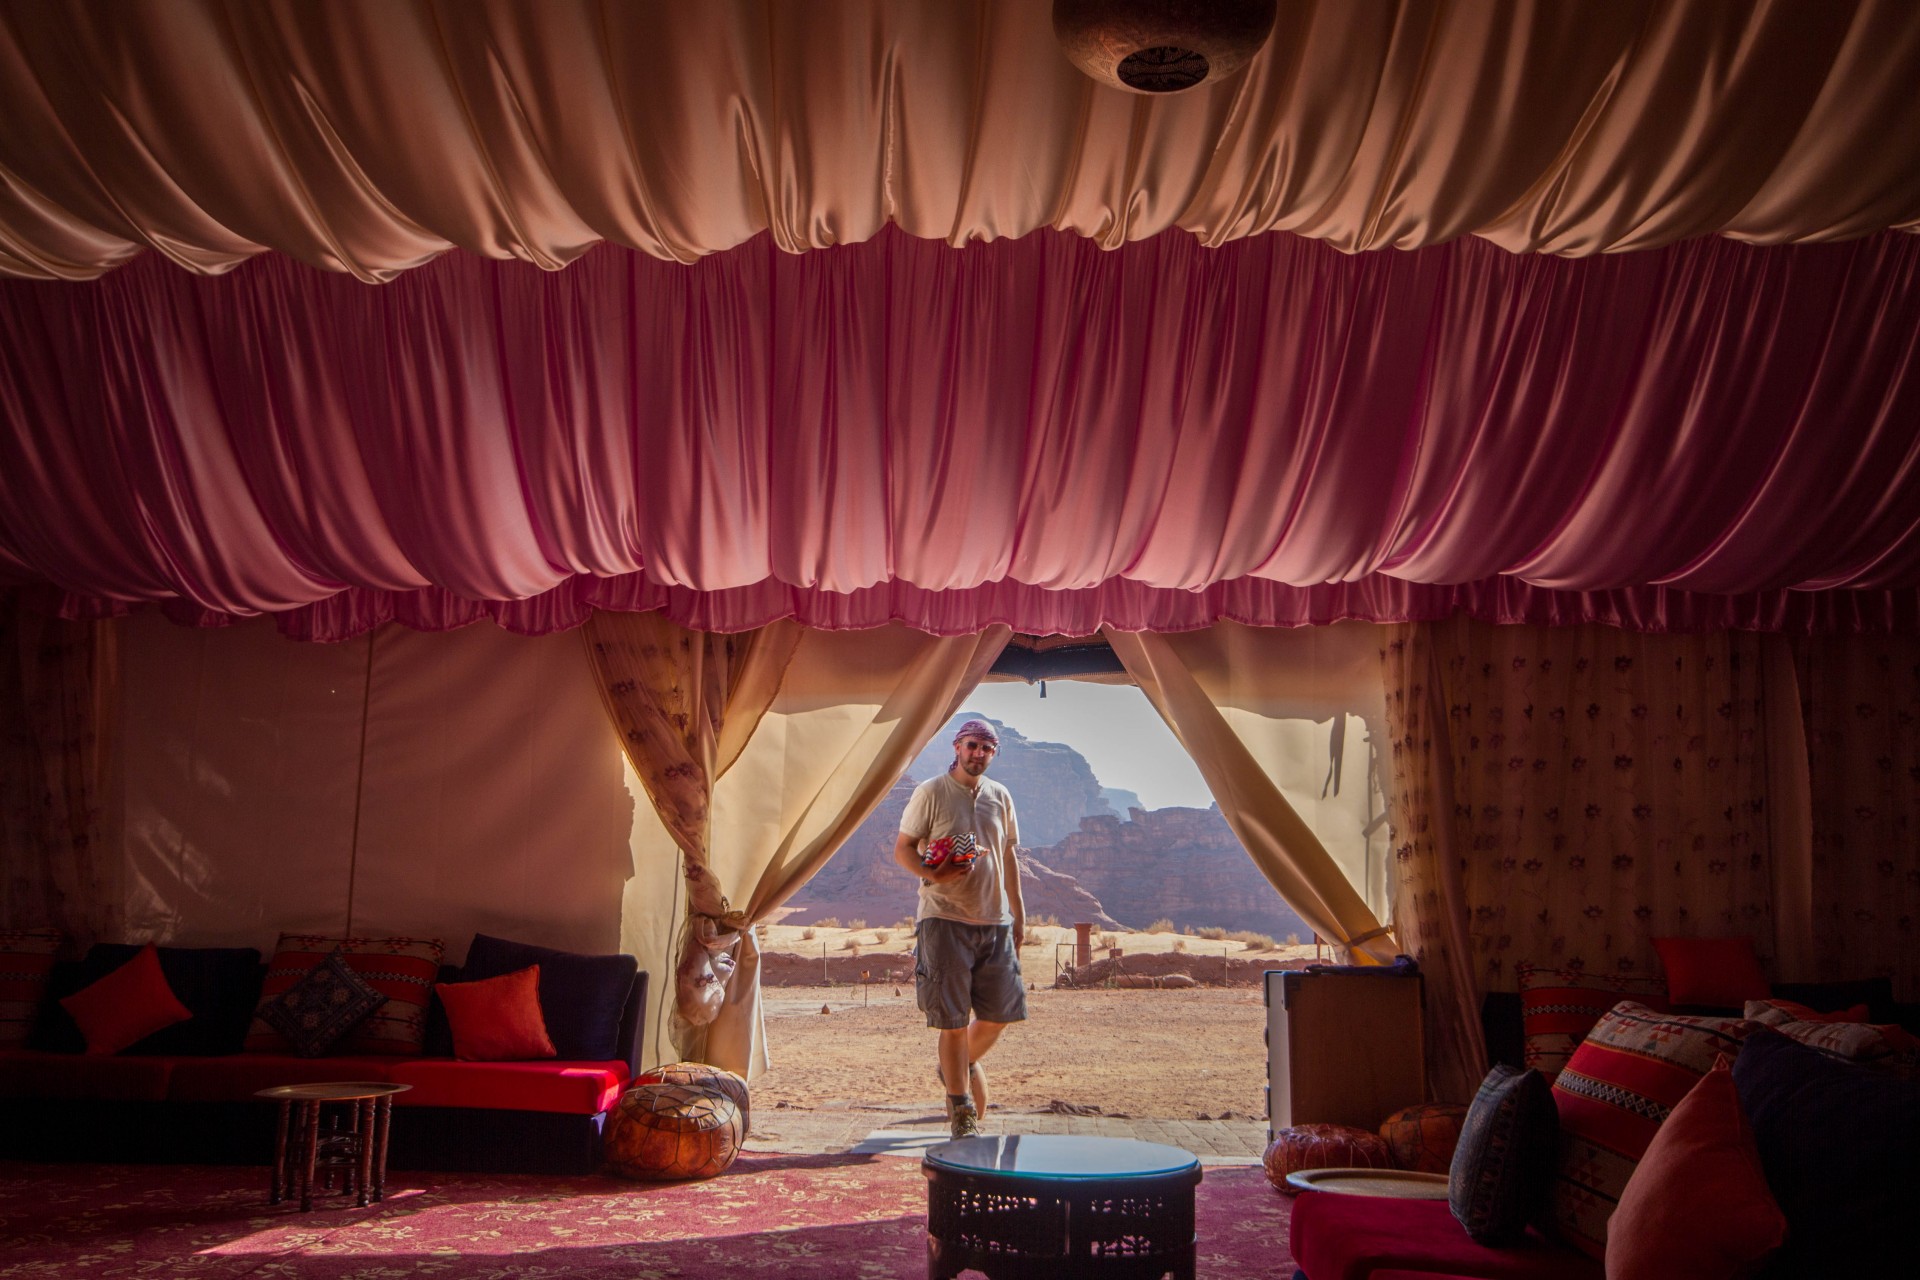 Dramatic drapery of a bedouin tent with a man standing at the entrance in the Wadi Rum Desert